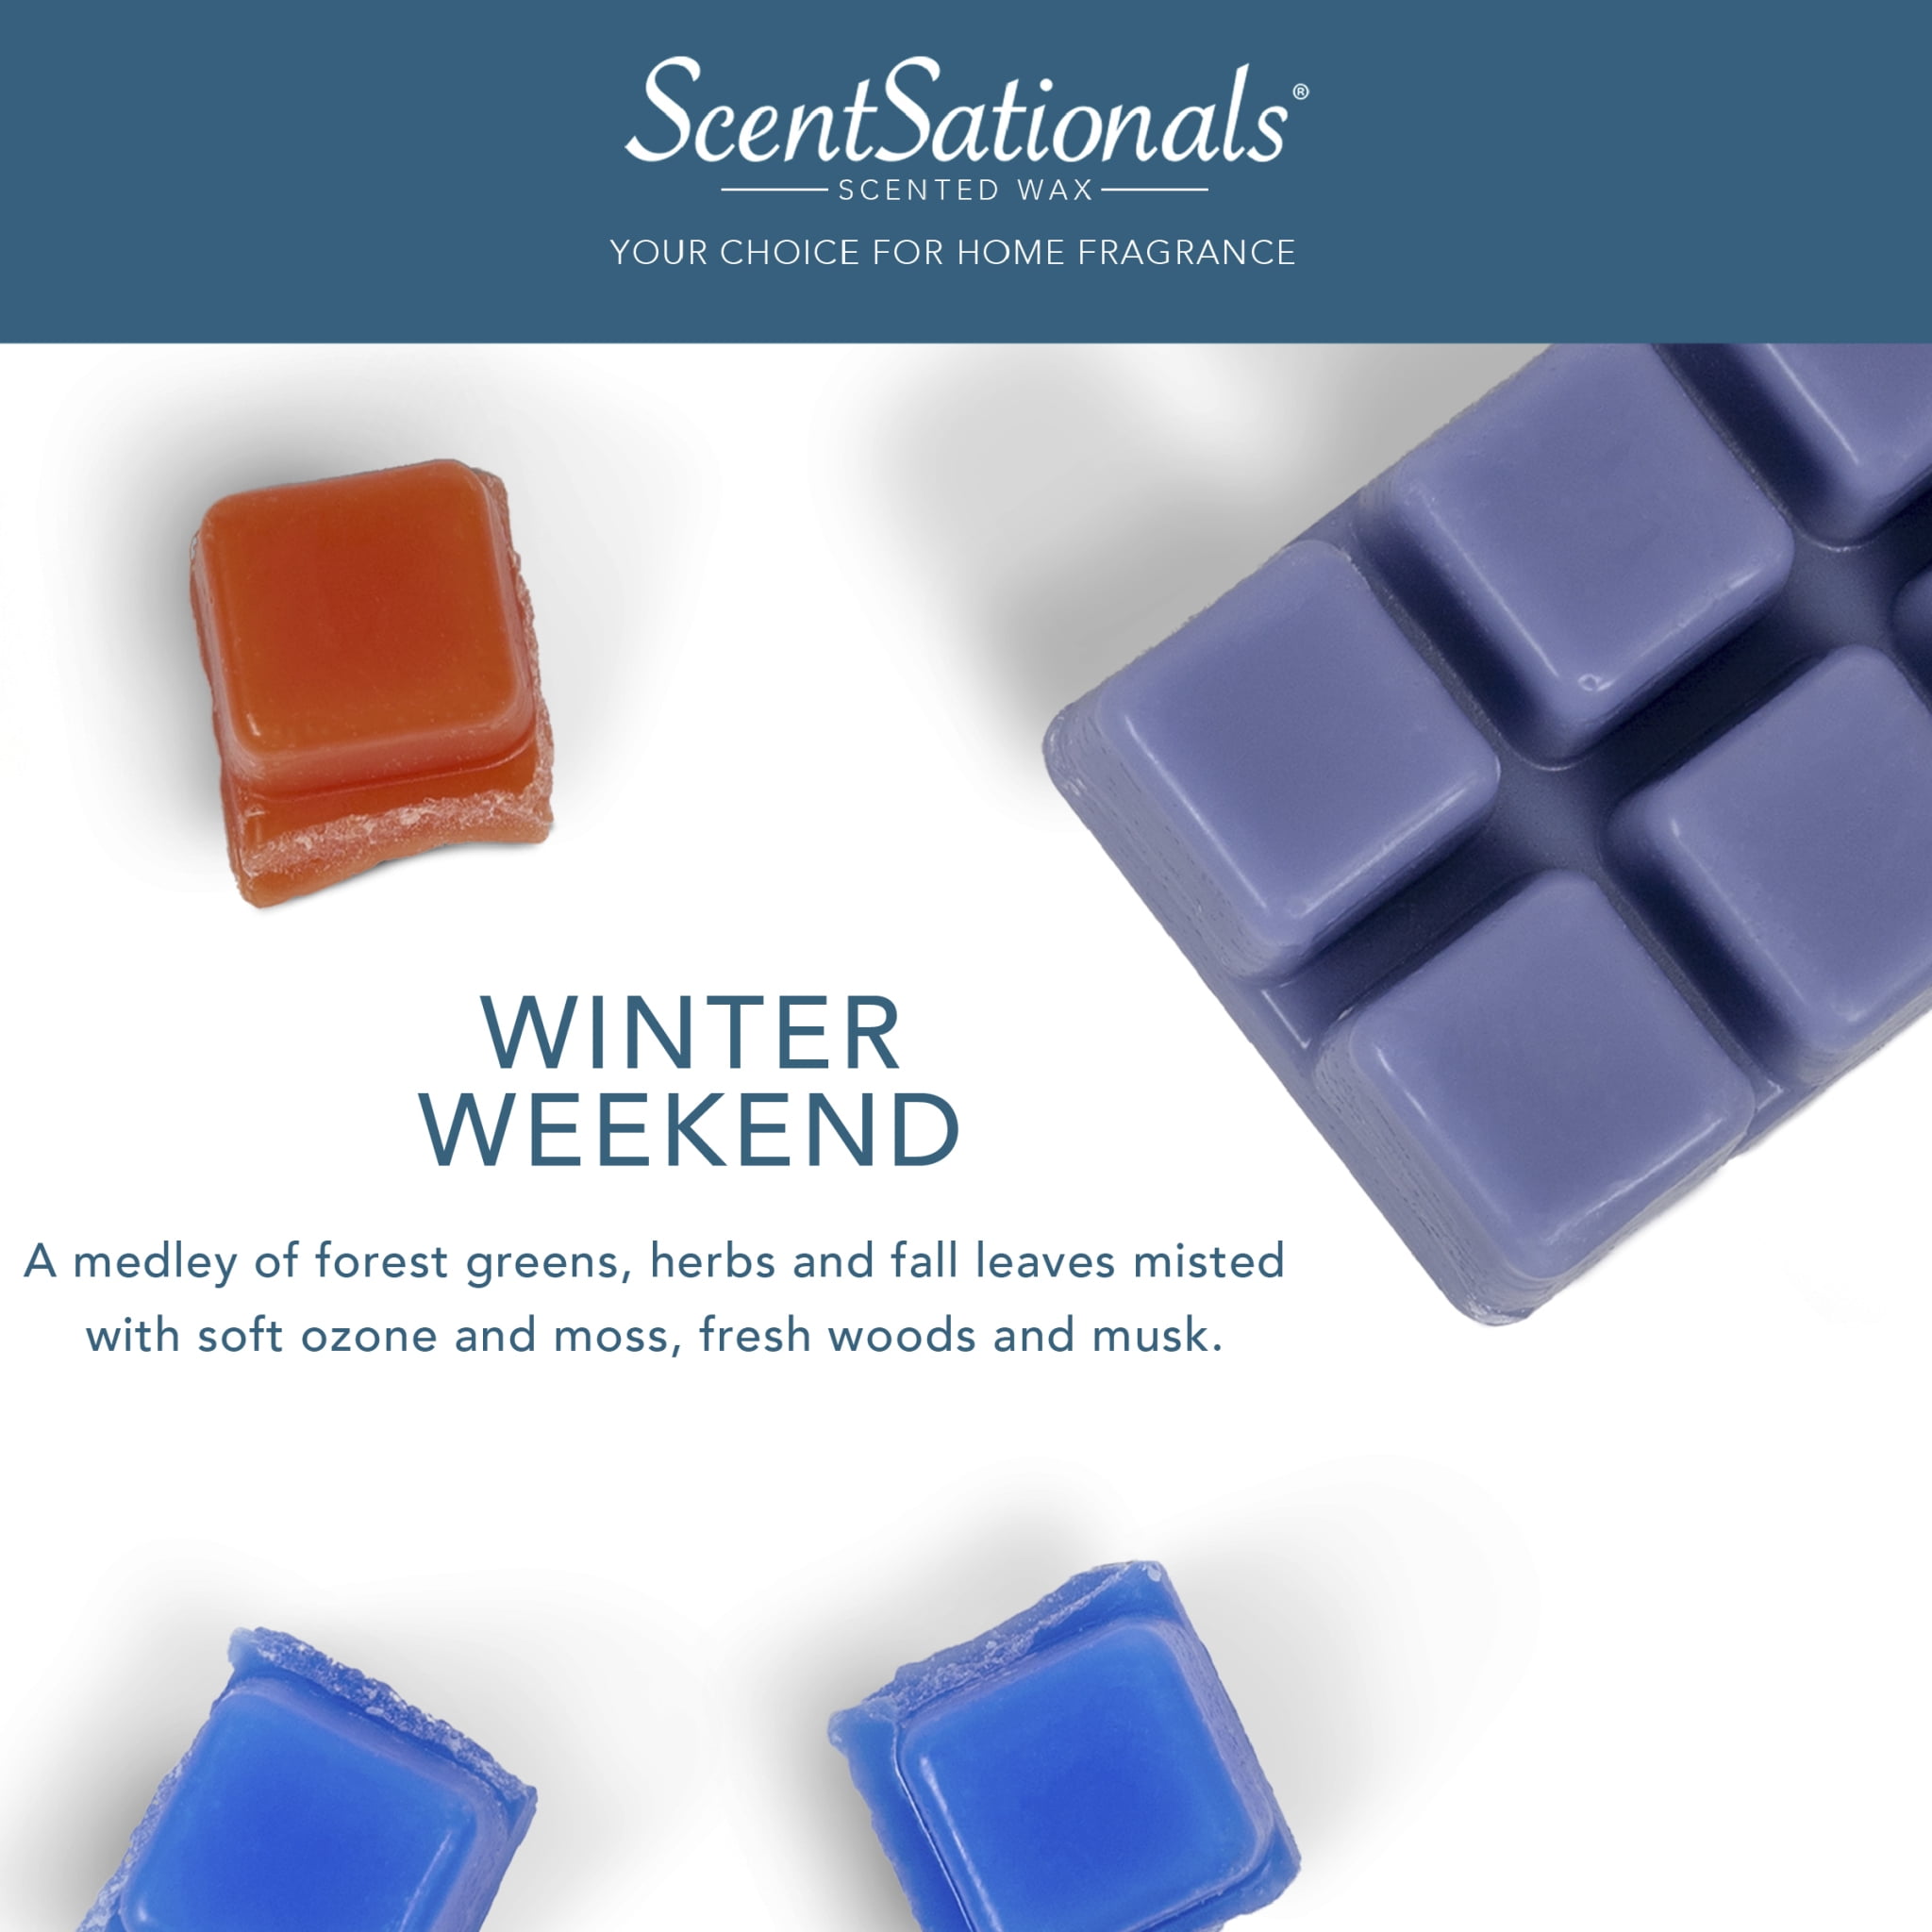 Gel Wax Melts, Warm up this winter with our new Winter Collection! We have  a wide range of winter scents to make your home feel cosy and inviting.  From Cherries on